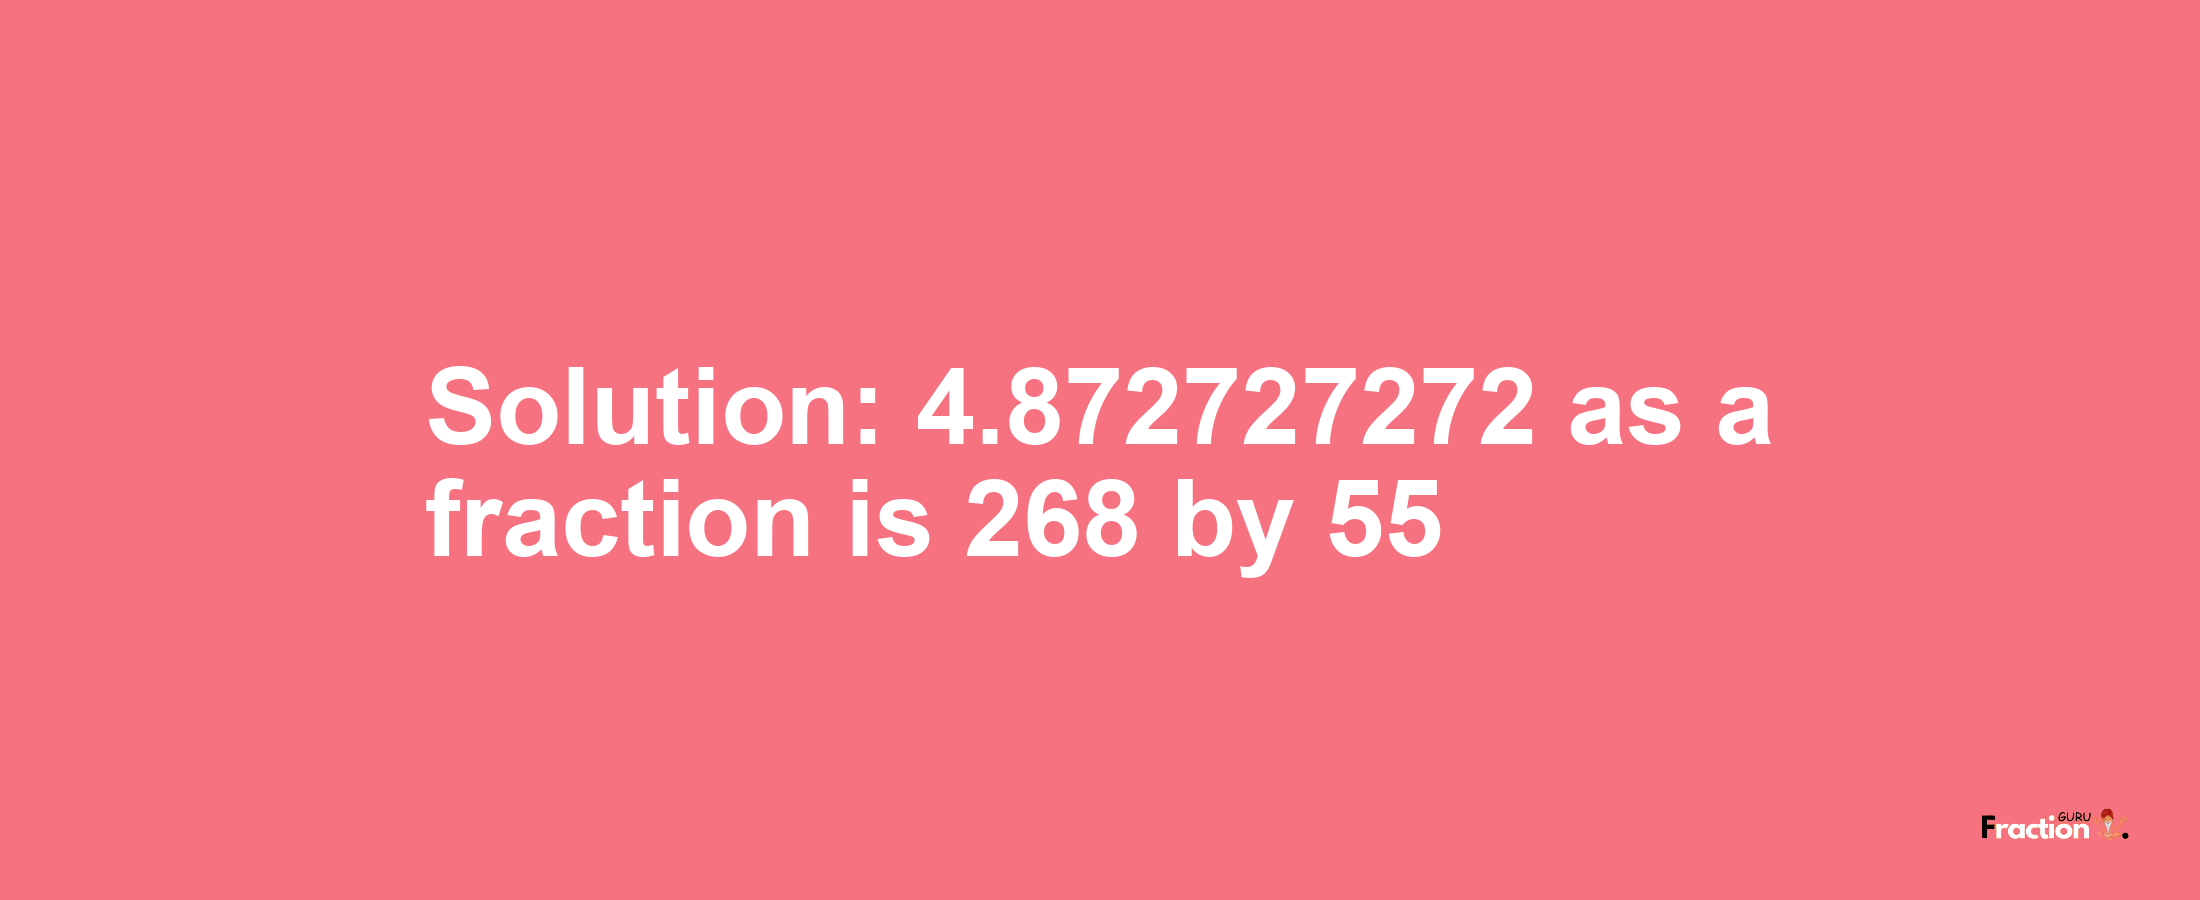 Solution:4.872727272 as a fraction is 268/55